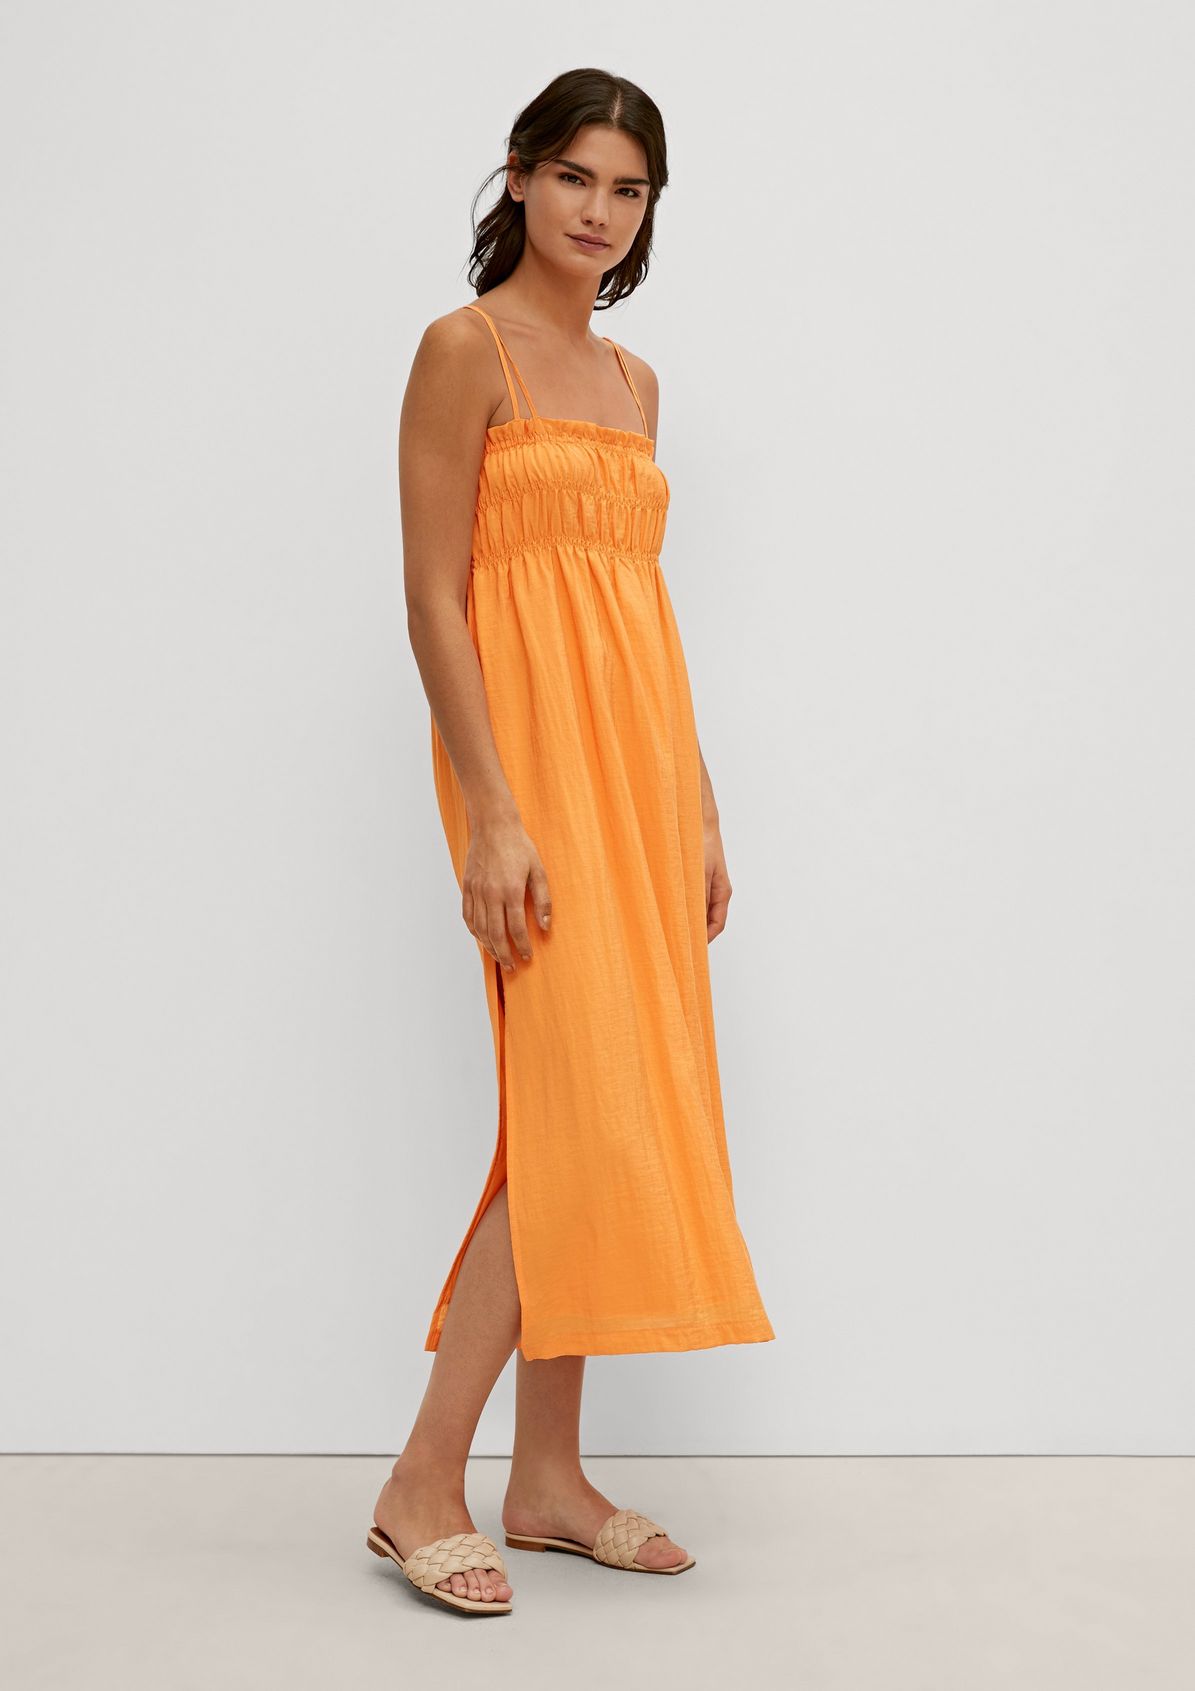 Midi dress with ruffle details from comma